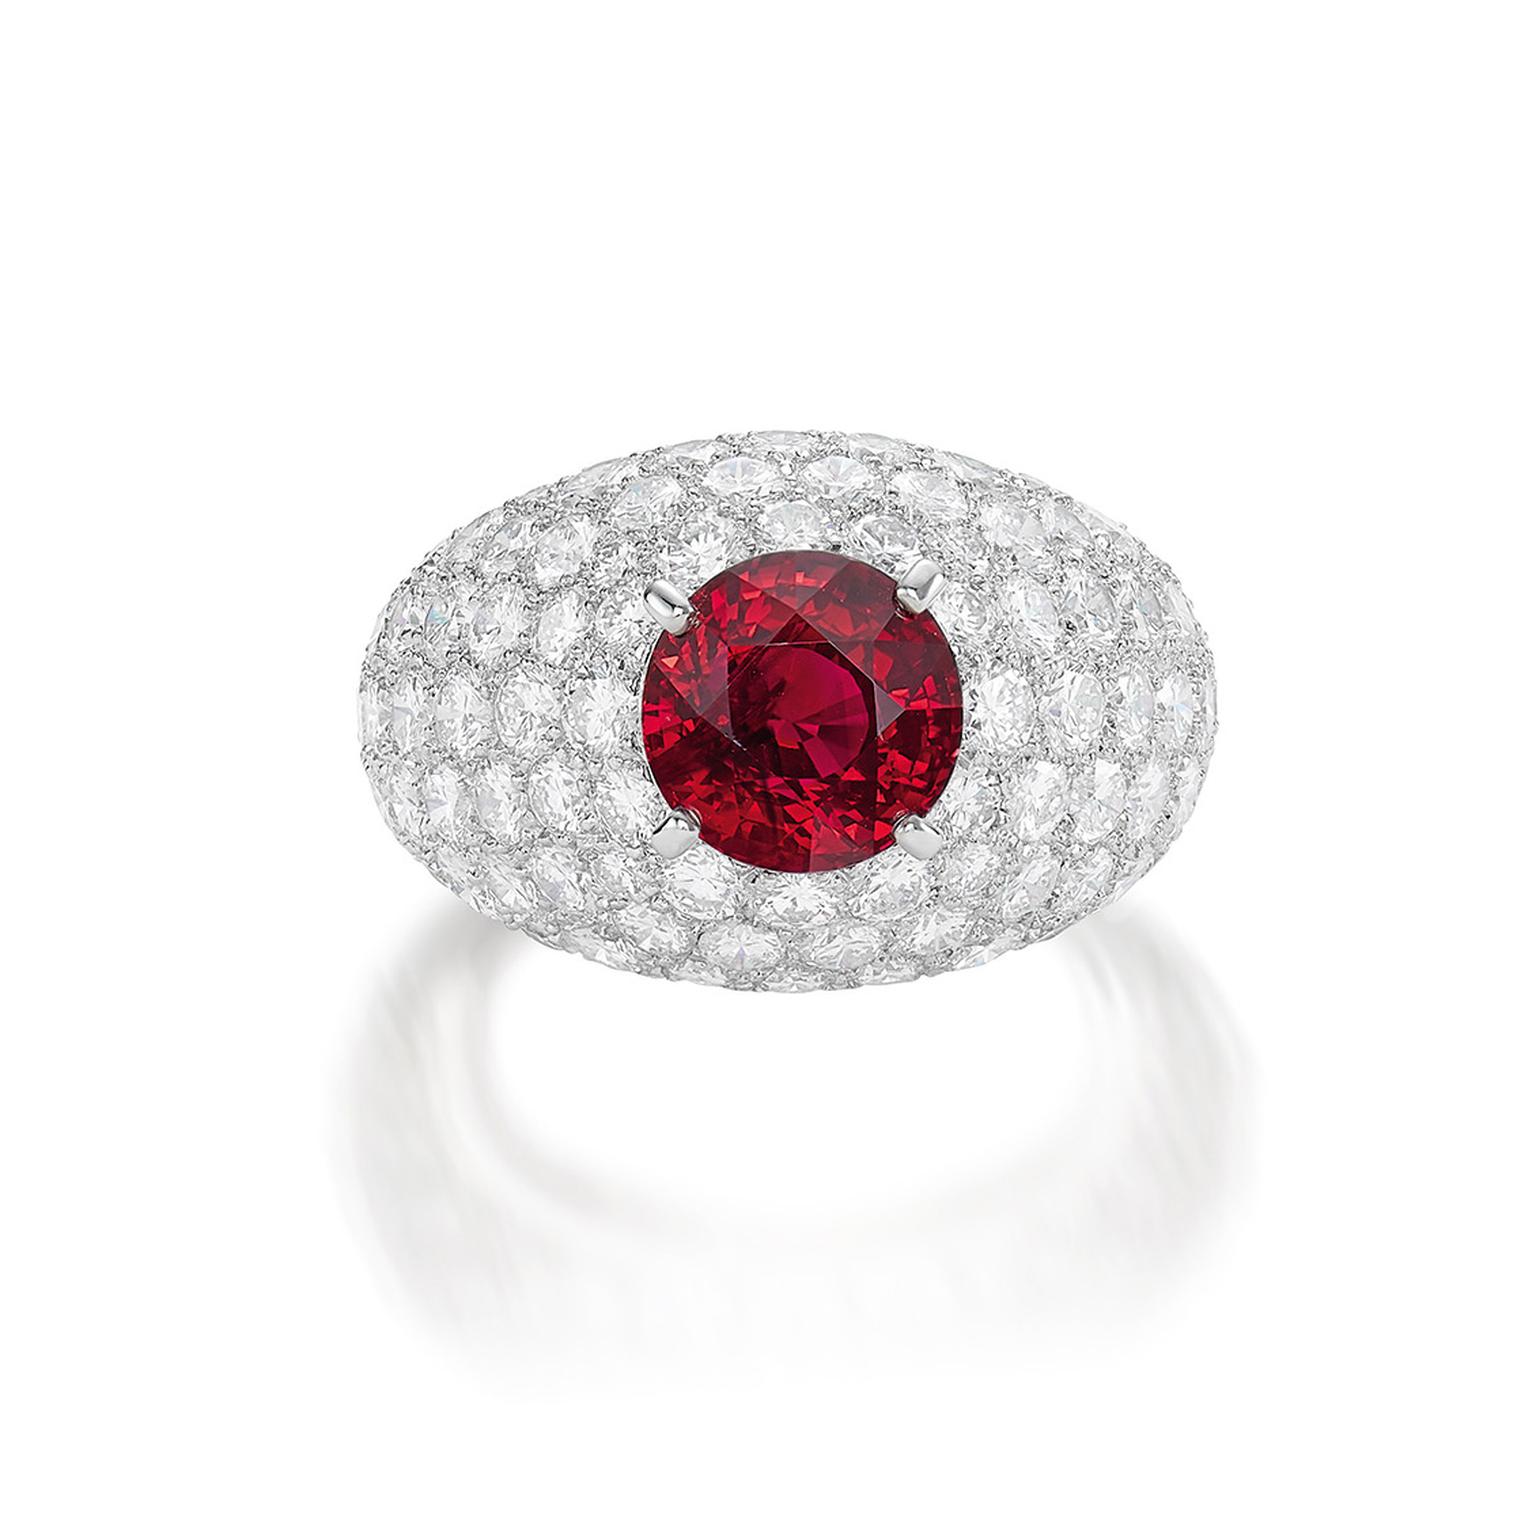 Lot 598 - Ruby ring by Cartier- Phillips Auction 5 June 2021